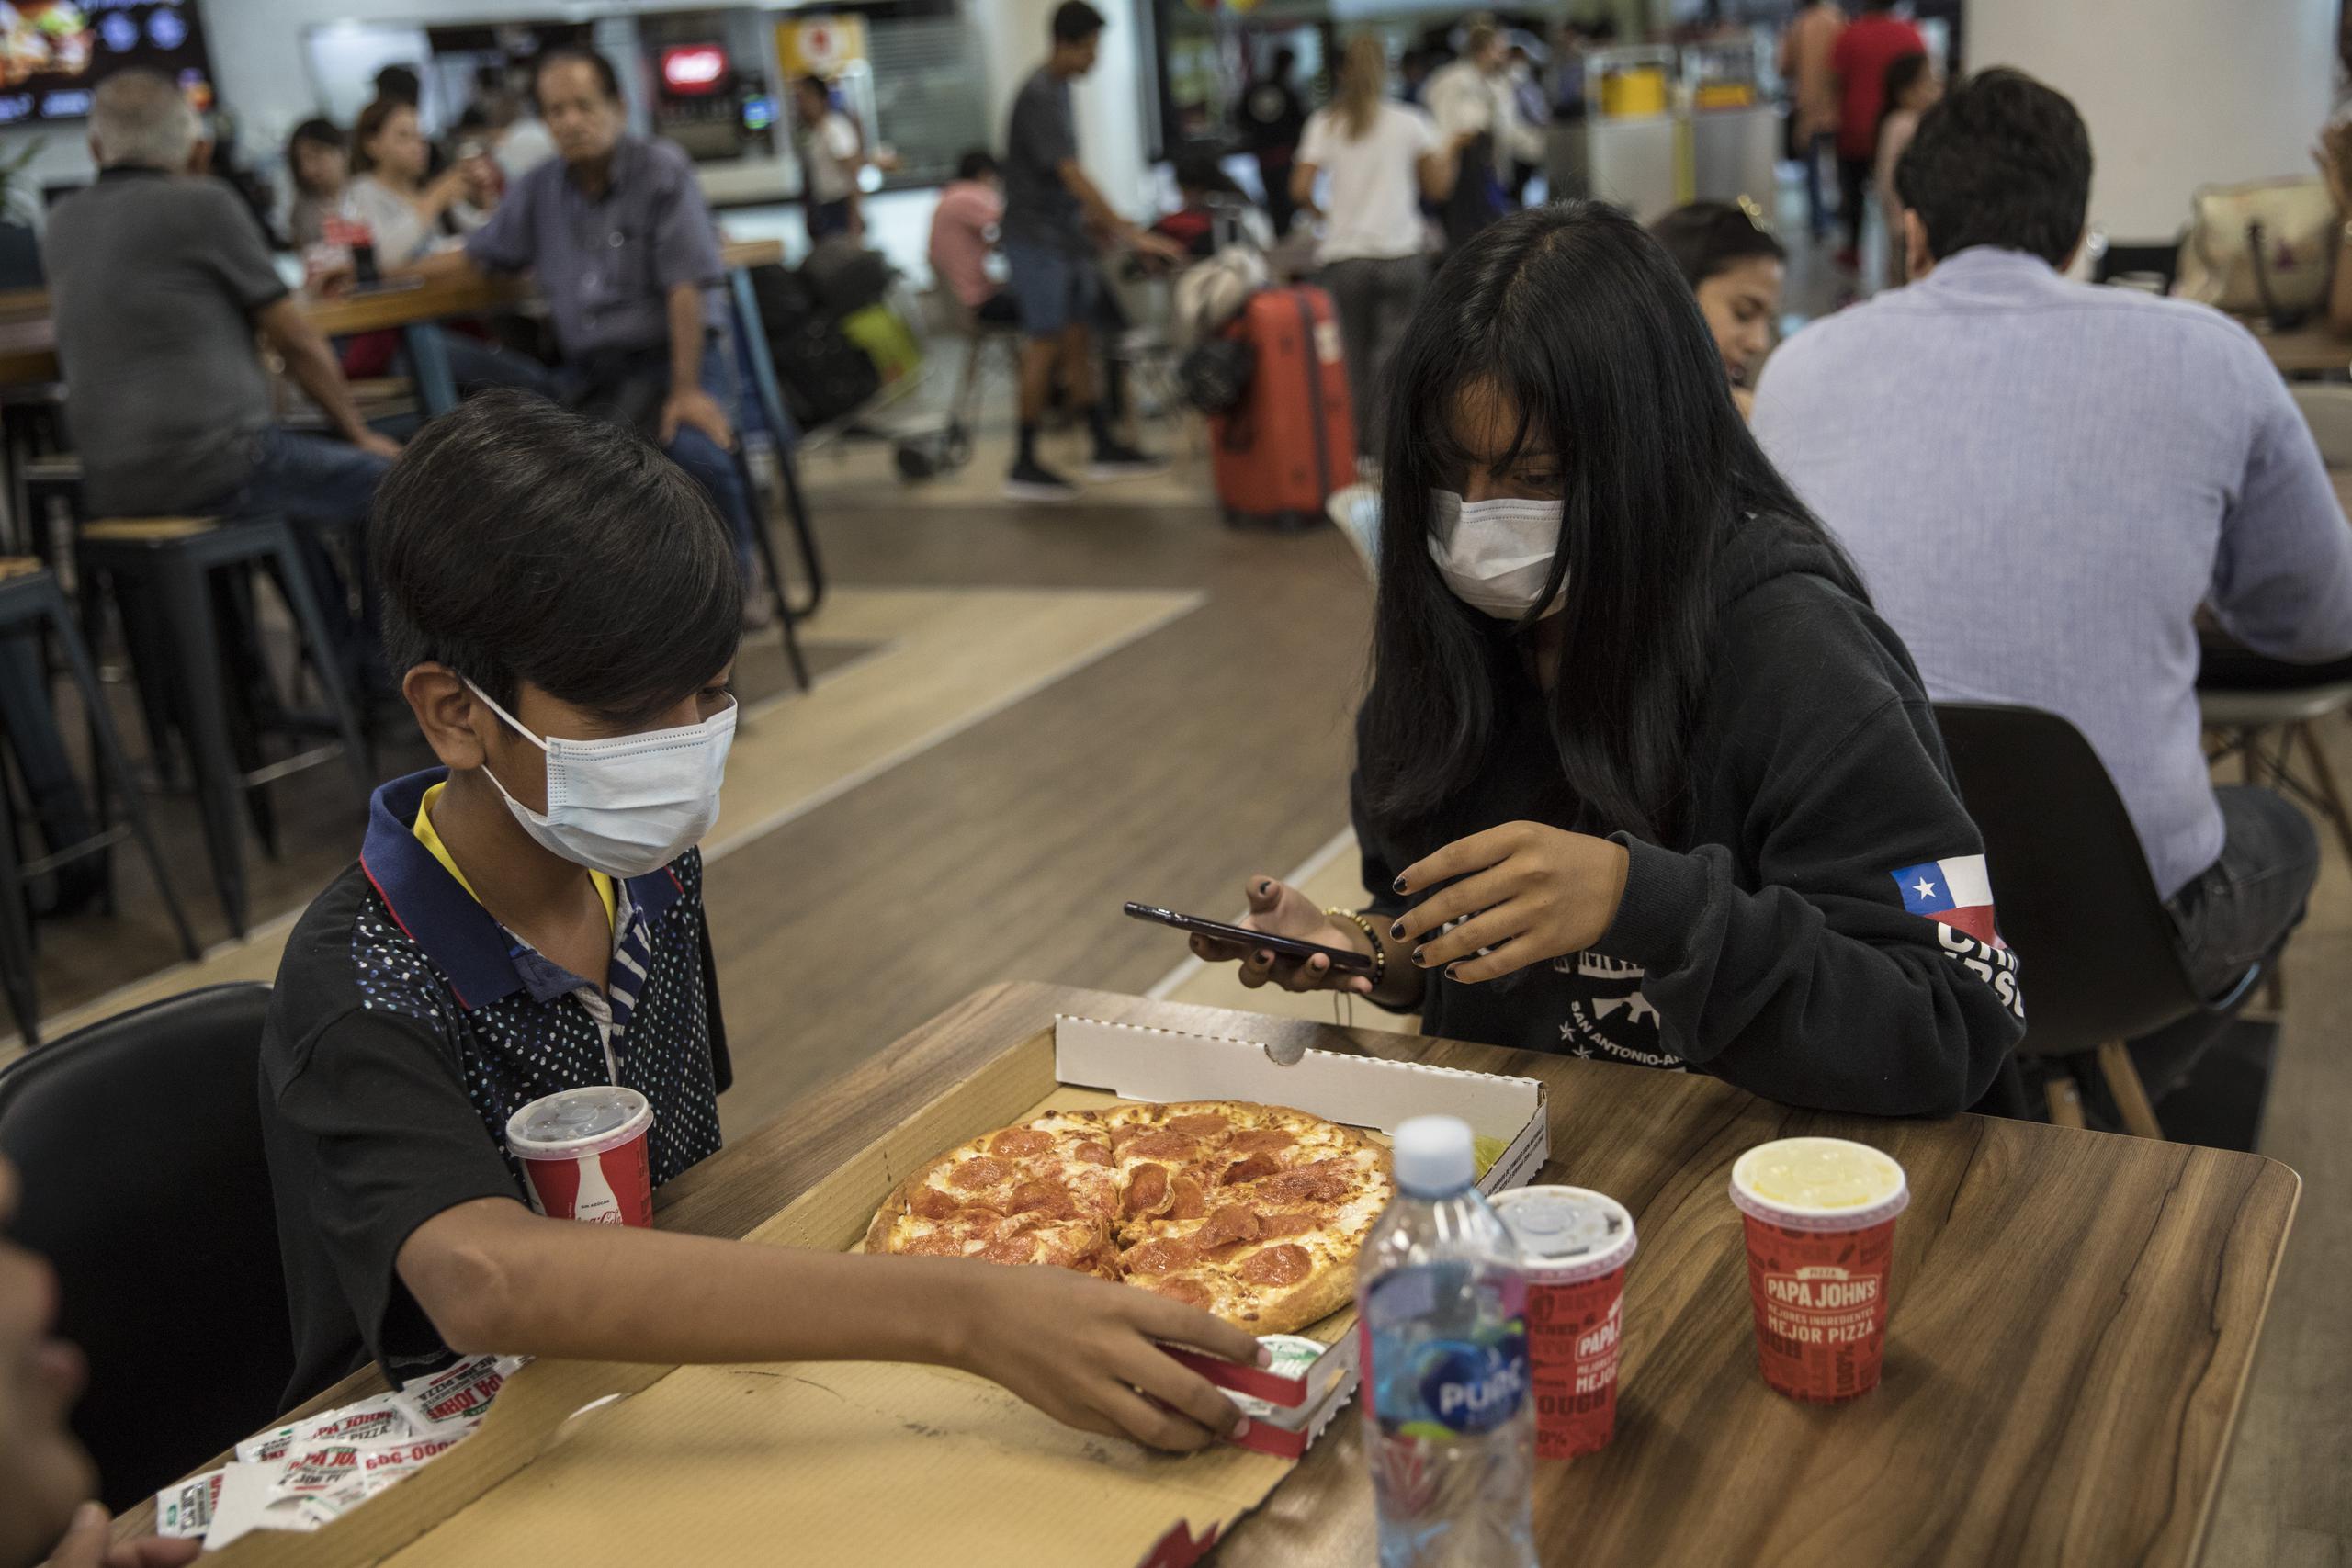 Wearing masks, passenger siblings from Chile, Yhoalibeth Ramos, right, and Oscar Ramos, eat pizza at the international airport in Lima, Peru, Friday, March 6, 2020. Peruvian President Martin Vizcarra announced the first case of the new coronavirus in the country. (AP Photo/Rodrigo Abd)